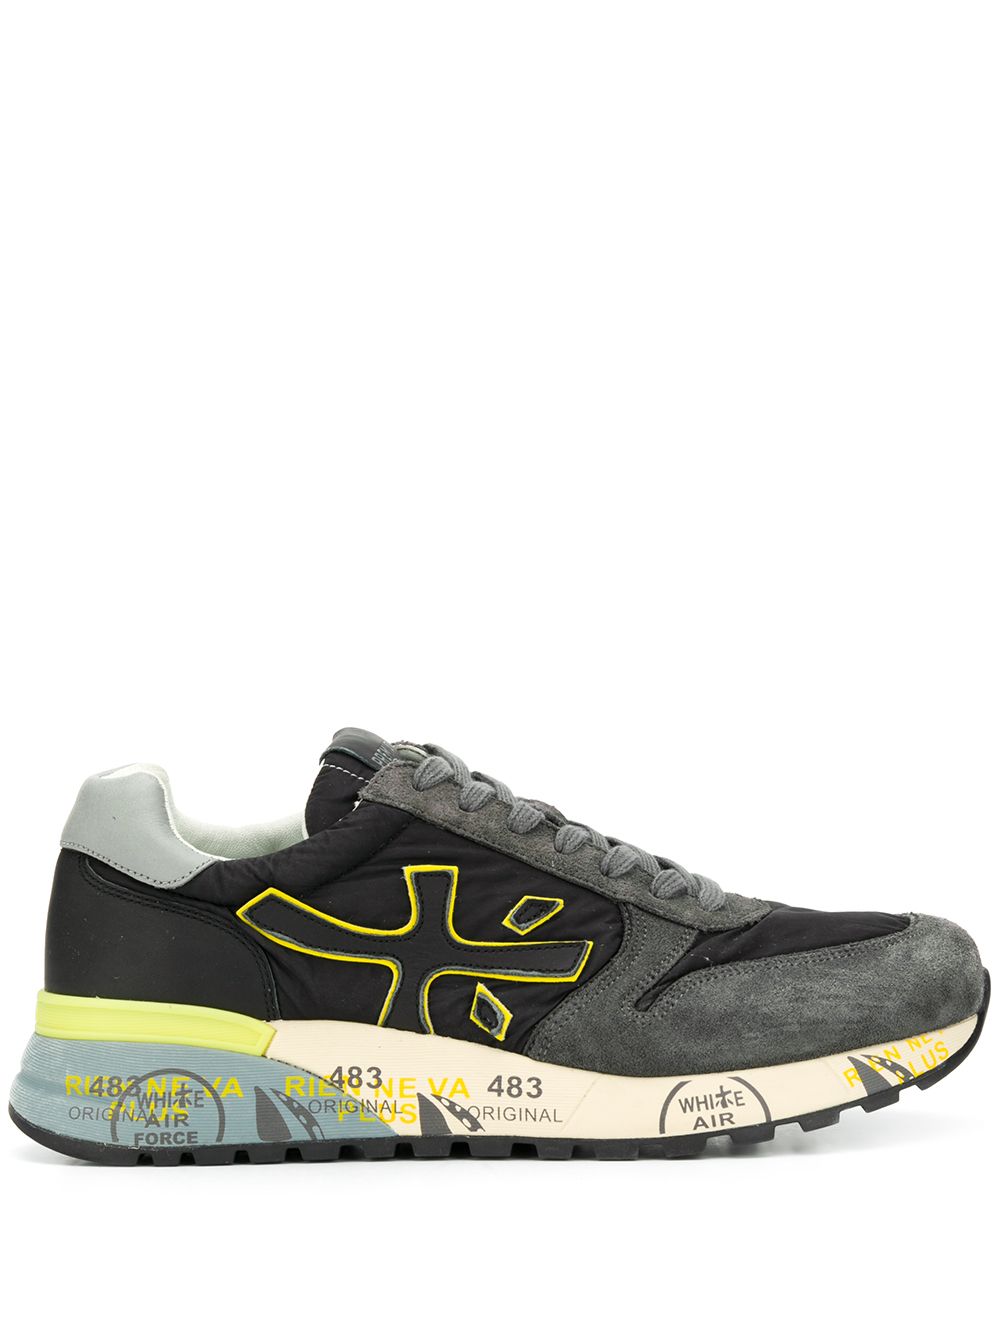 Shop black Premiata Mick low-top sneakers with Express Delivery - Farfetch